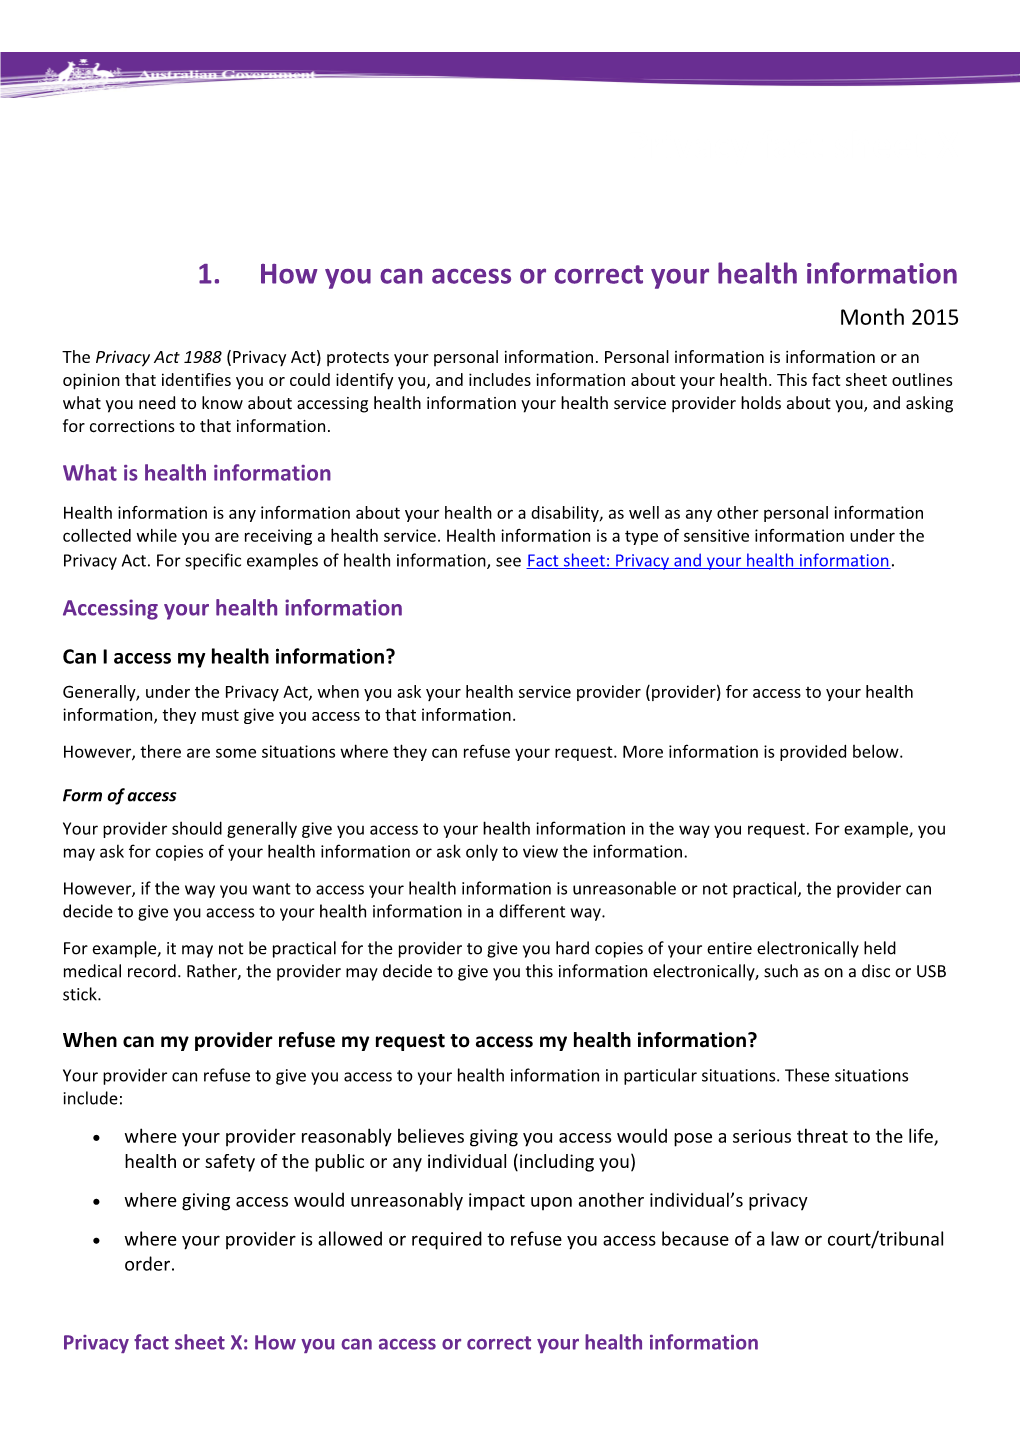 How You Can Access Or Correct Your Health Information